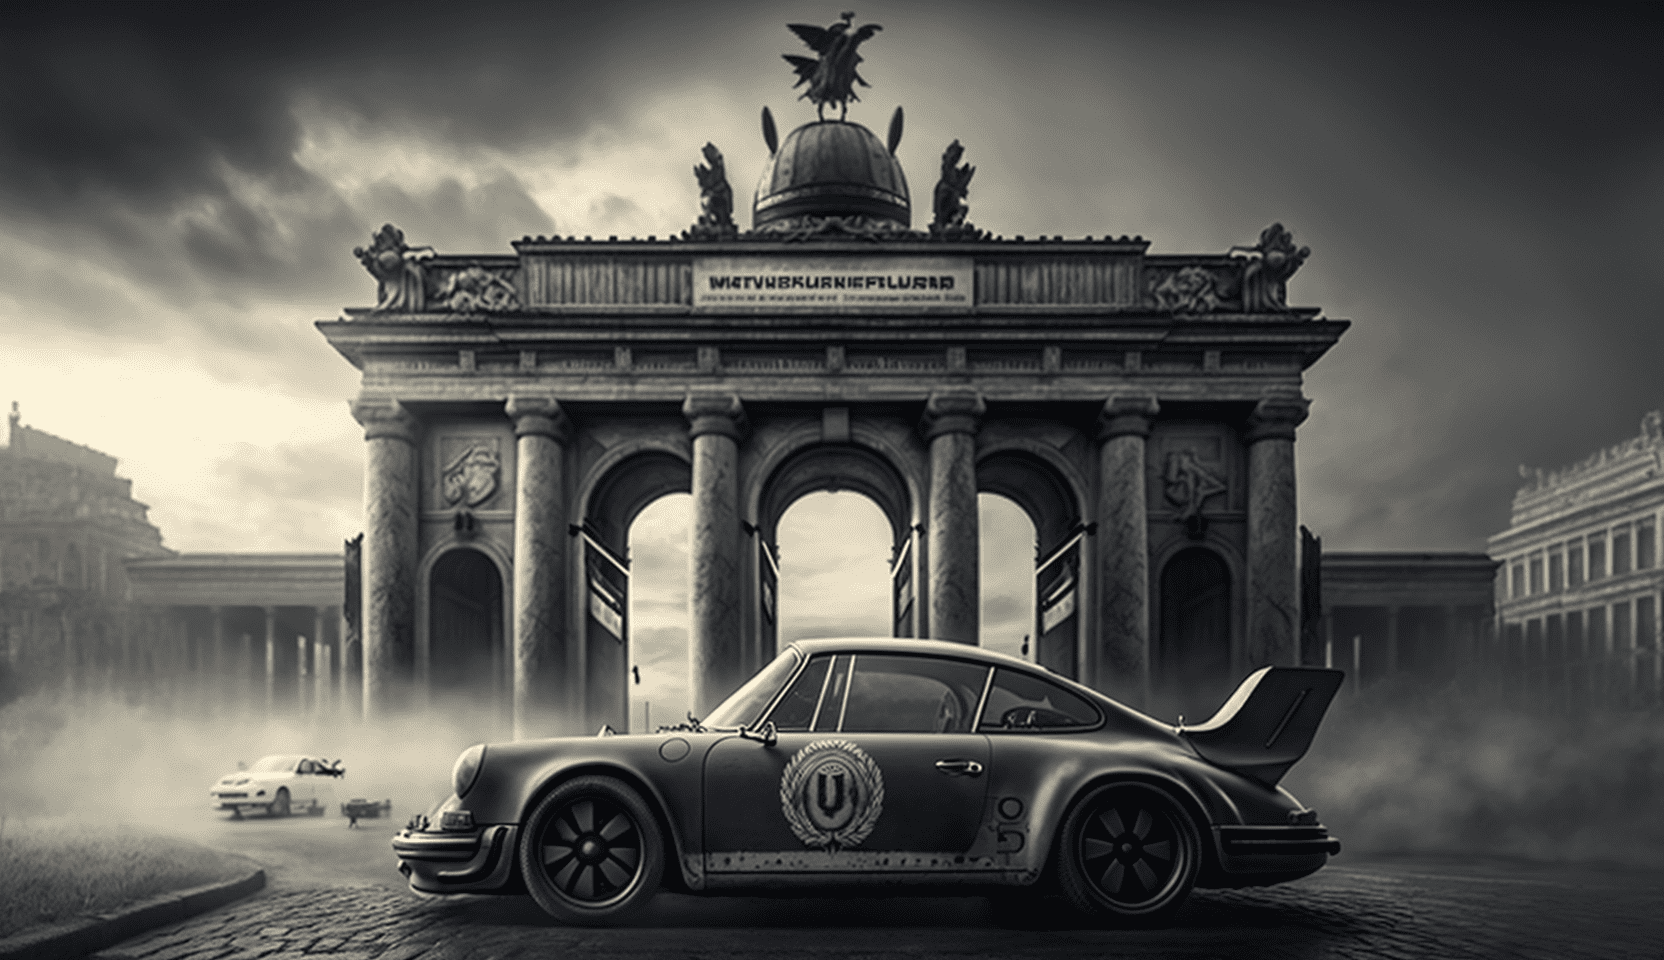 The German eco-movement and the Porsche 911 as their target